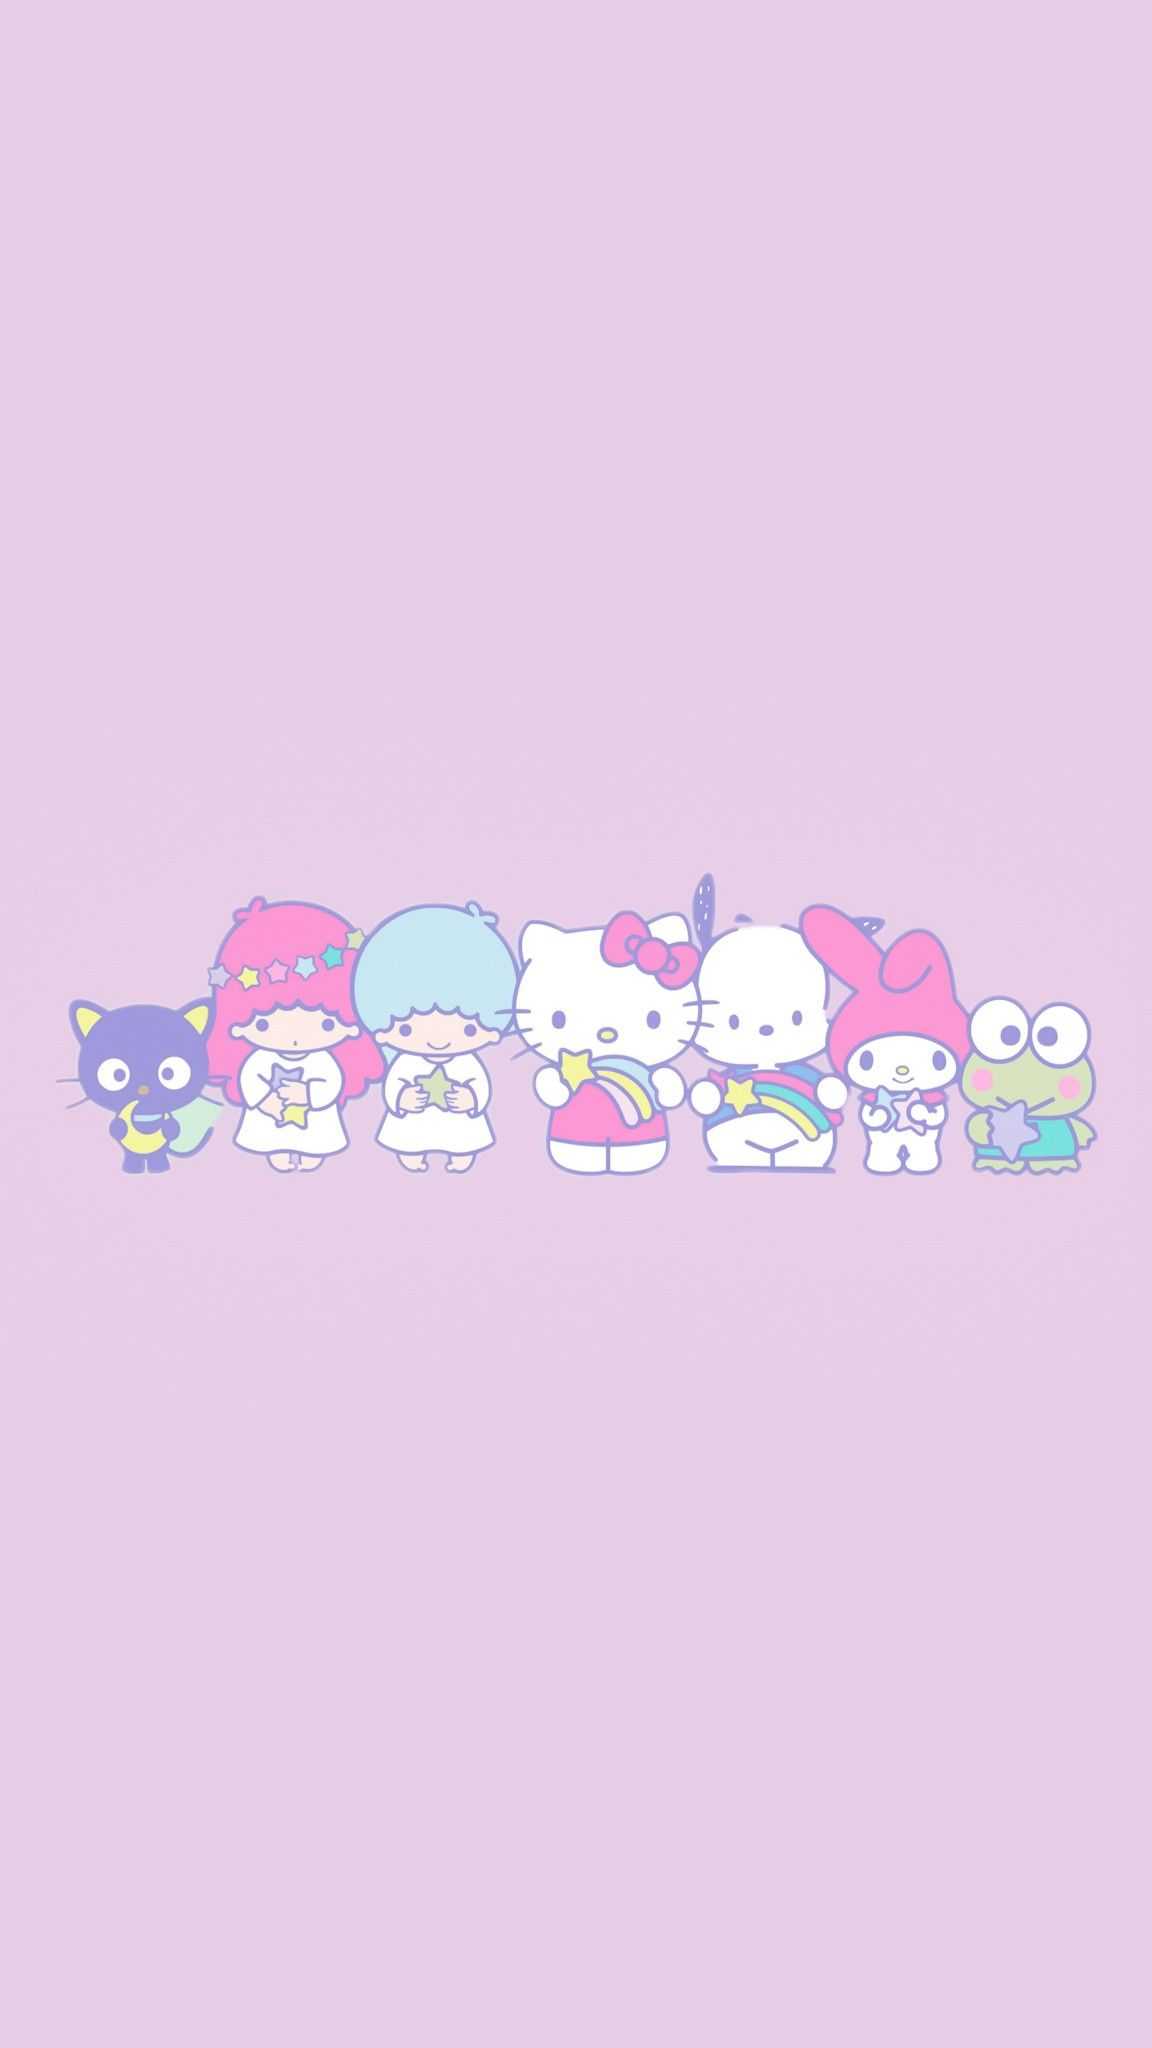 Sanrio Characters iPhone Wallpaper with high-resolution 1080x1920 pixel. You can use this wallpaper for your iPhone 5, 6, 7, 8, X, XS, XR backgrounds, Mobile Screensaver, or iPad Lock Screen - Hello Kitty, Sanrio